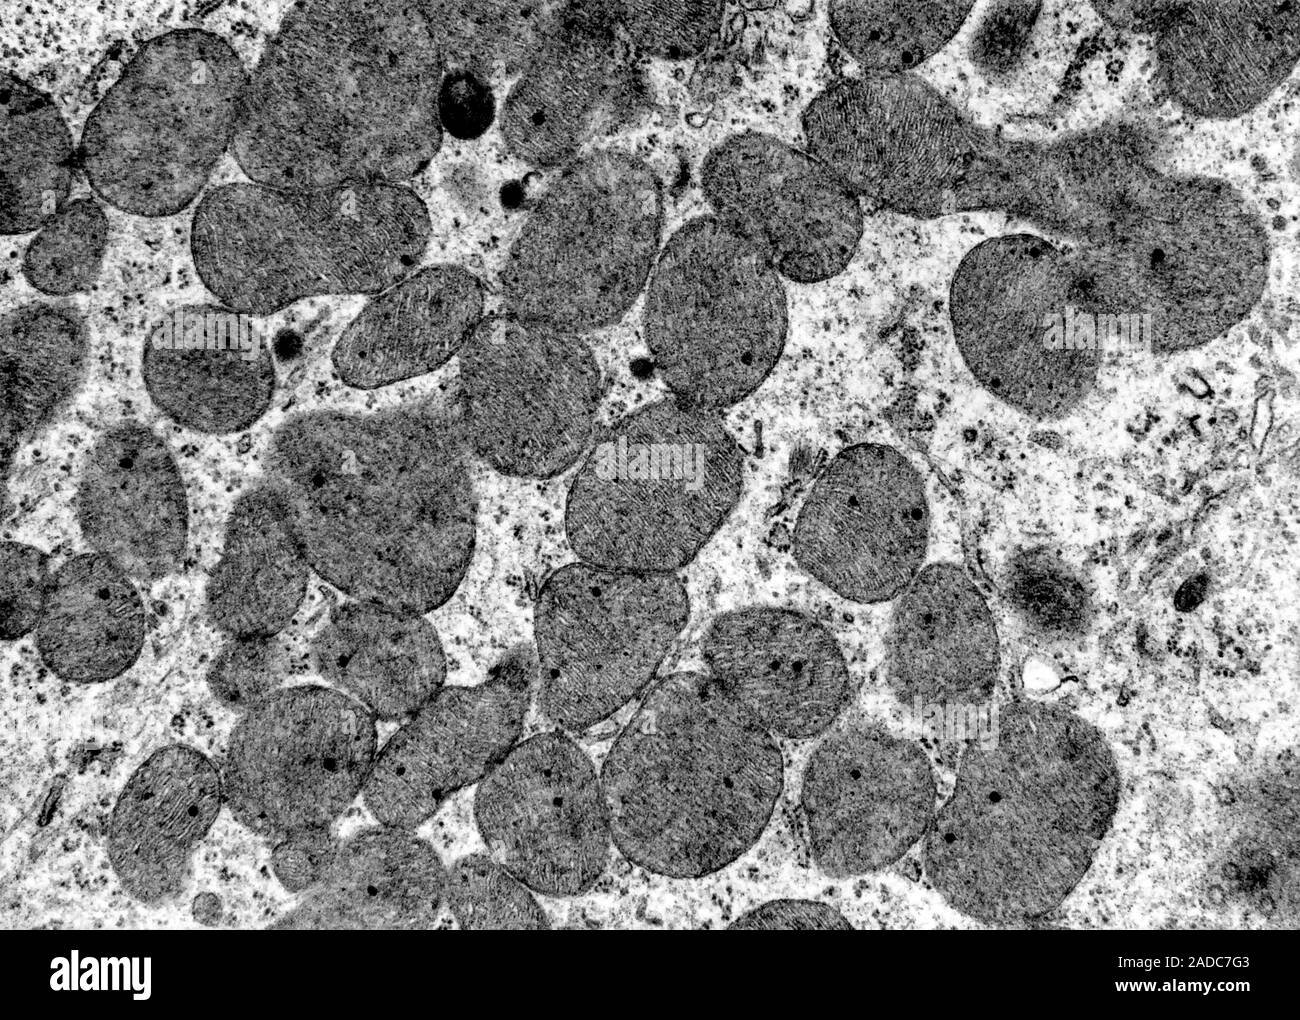 Transmission electron micrograph (TEM) showing mitochondria with ...